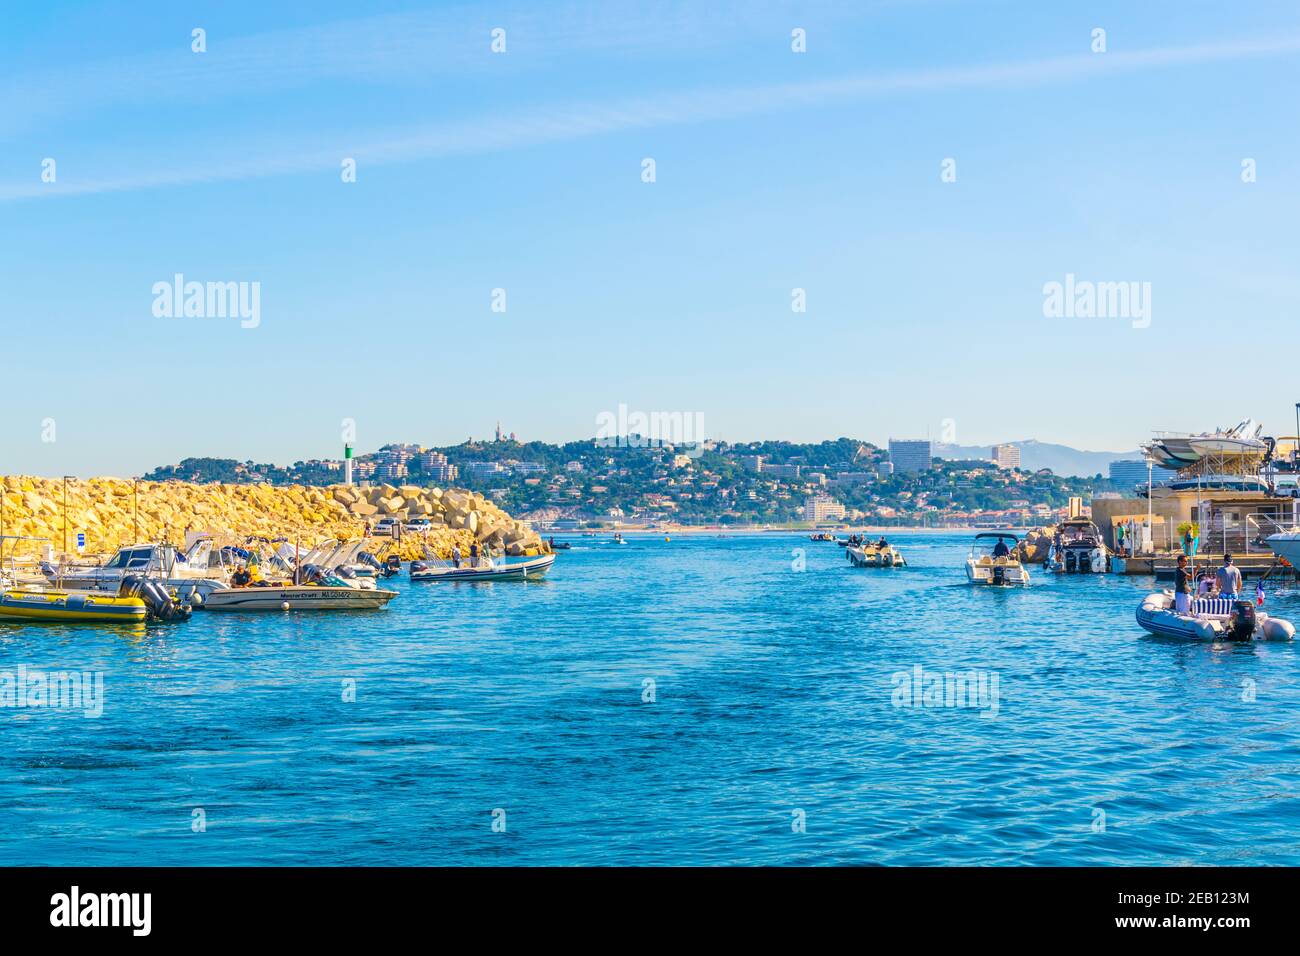 MARSEILLE, FRANCE, JUNE 10, 2017: Pointe Rouge Marina at Marseille, France Stock Photo